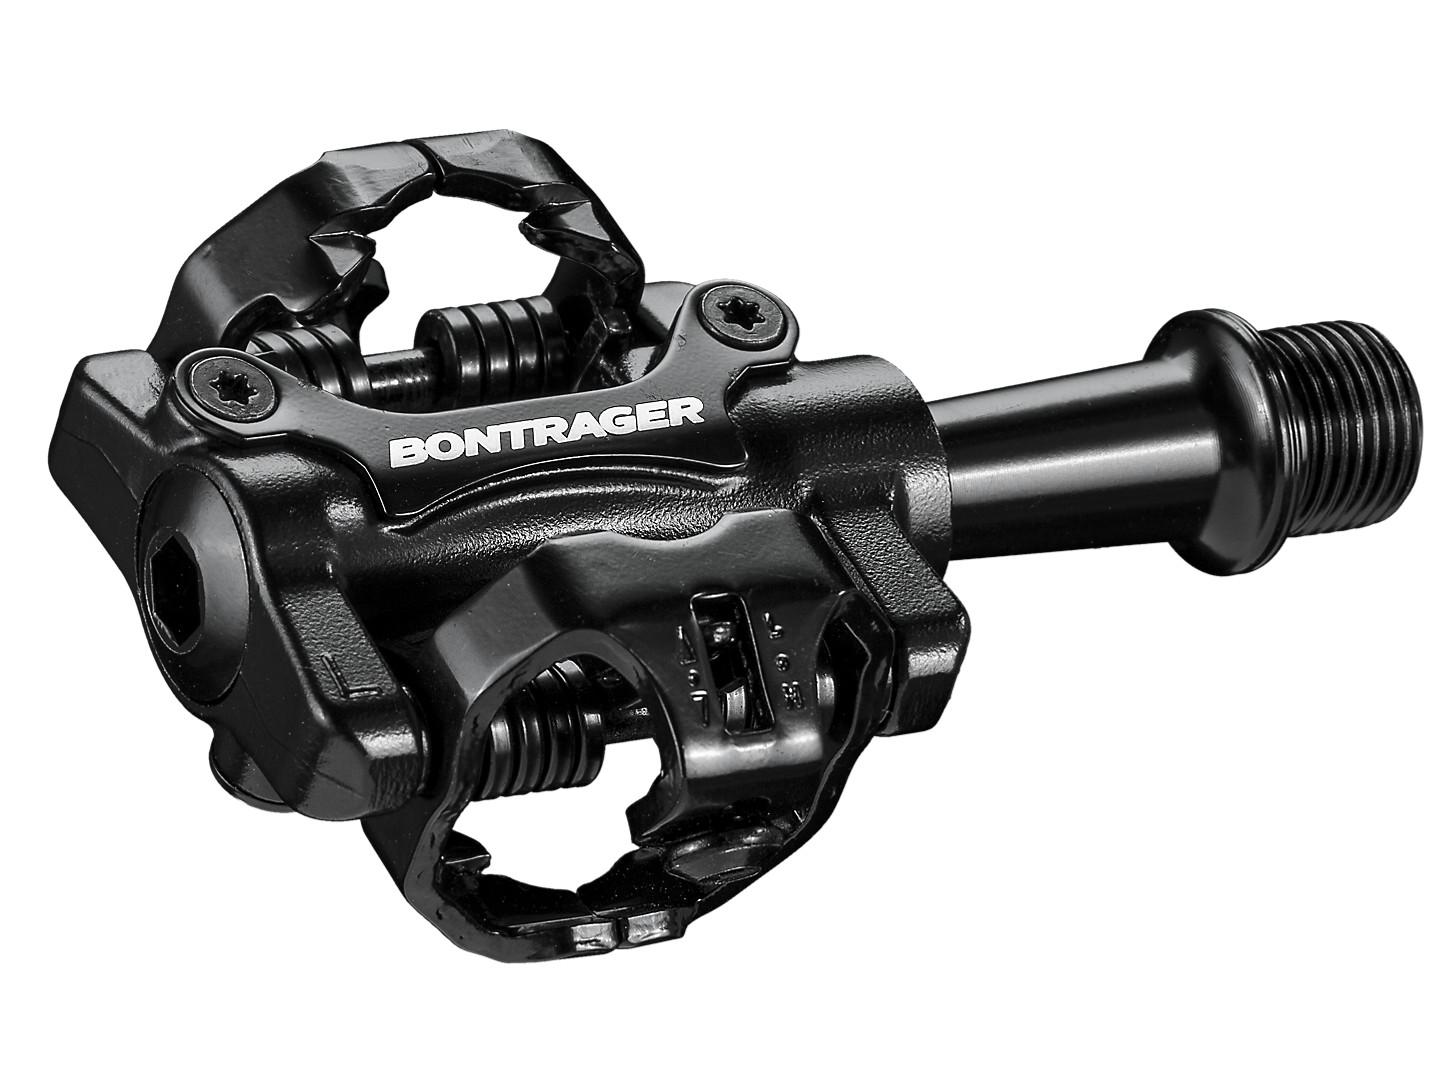 BONTRAGER Comp mountainbikepedaal